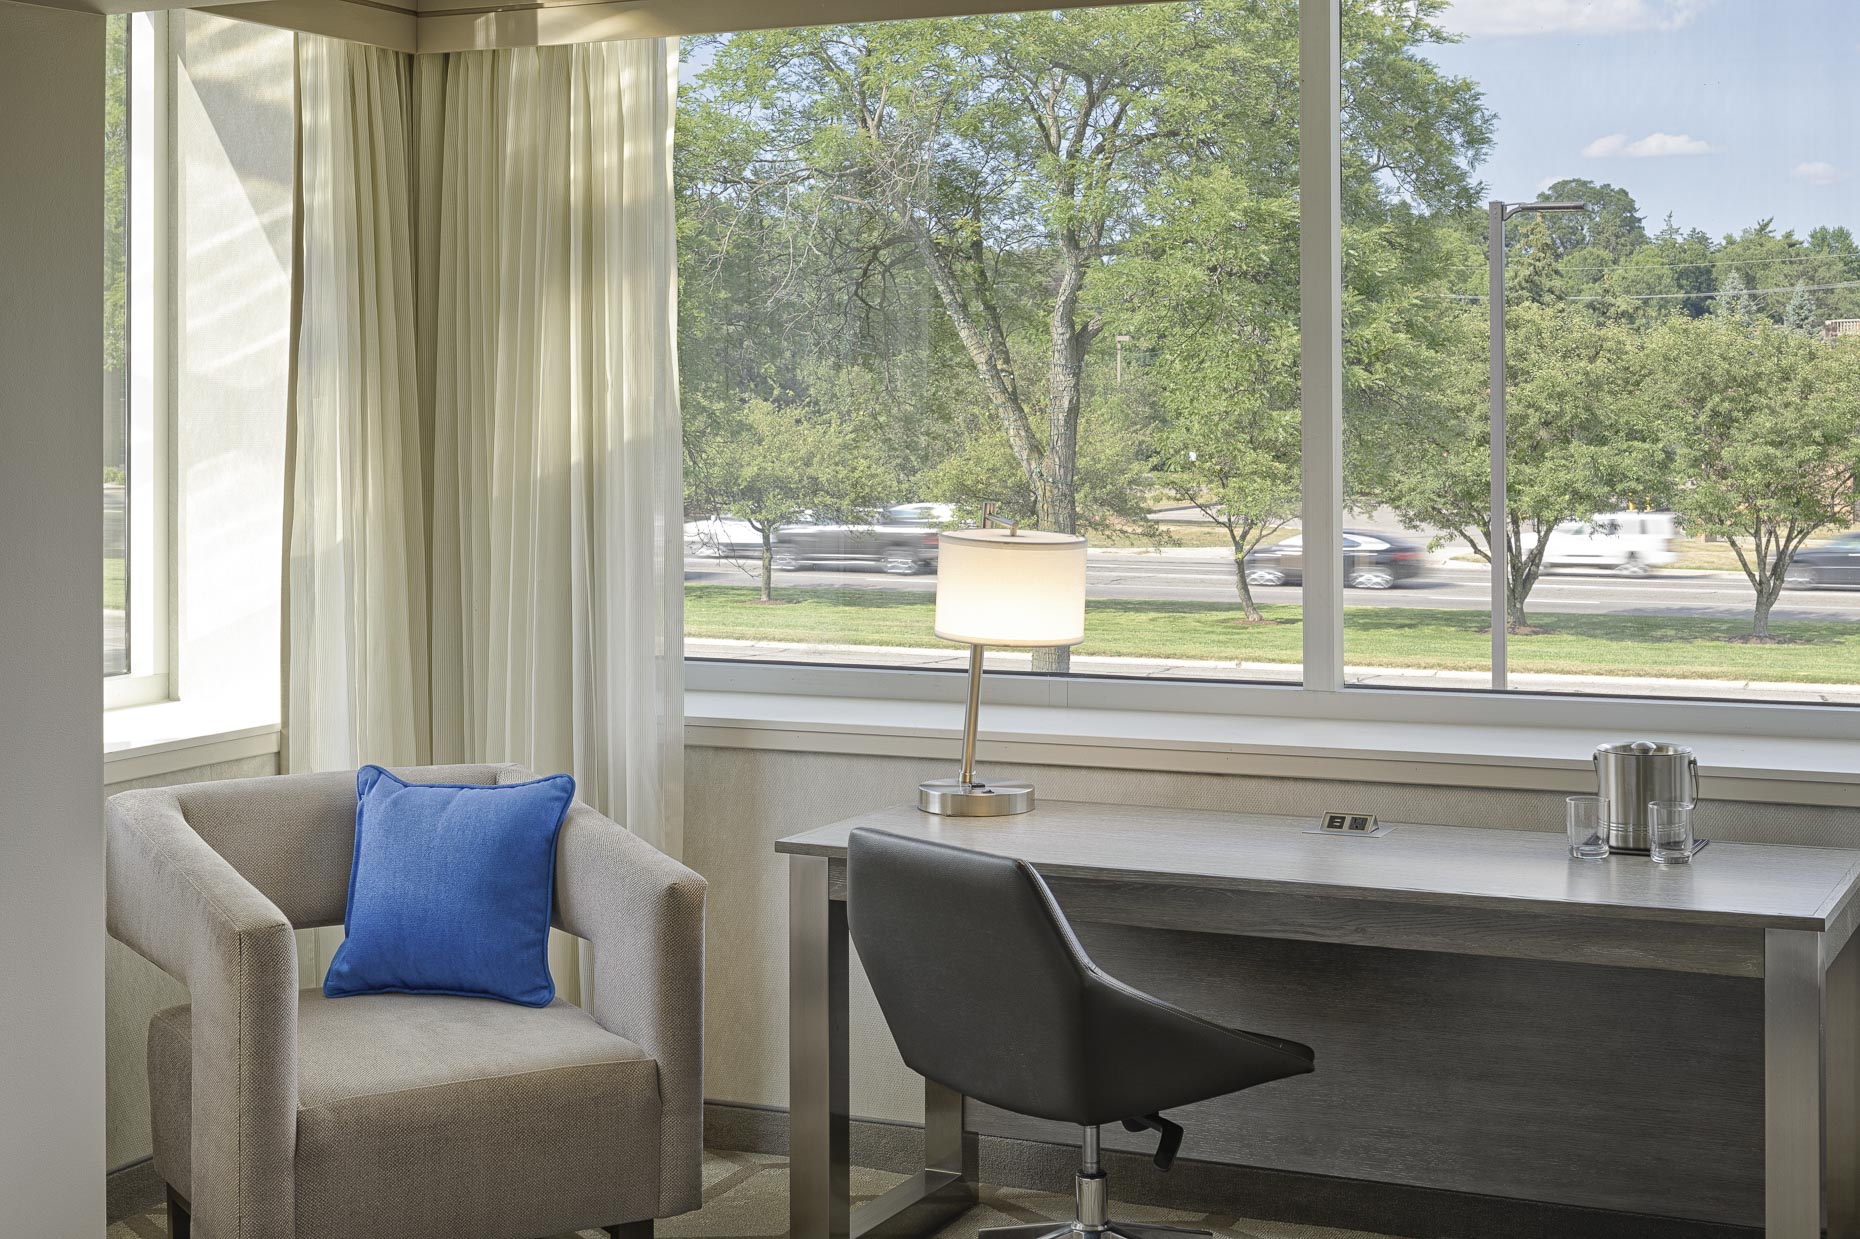 DoubleTree by Hilton Bloomfield Hills for Hilton photographed by Lauren K Davis based in Columbus, Ohio